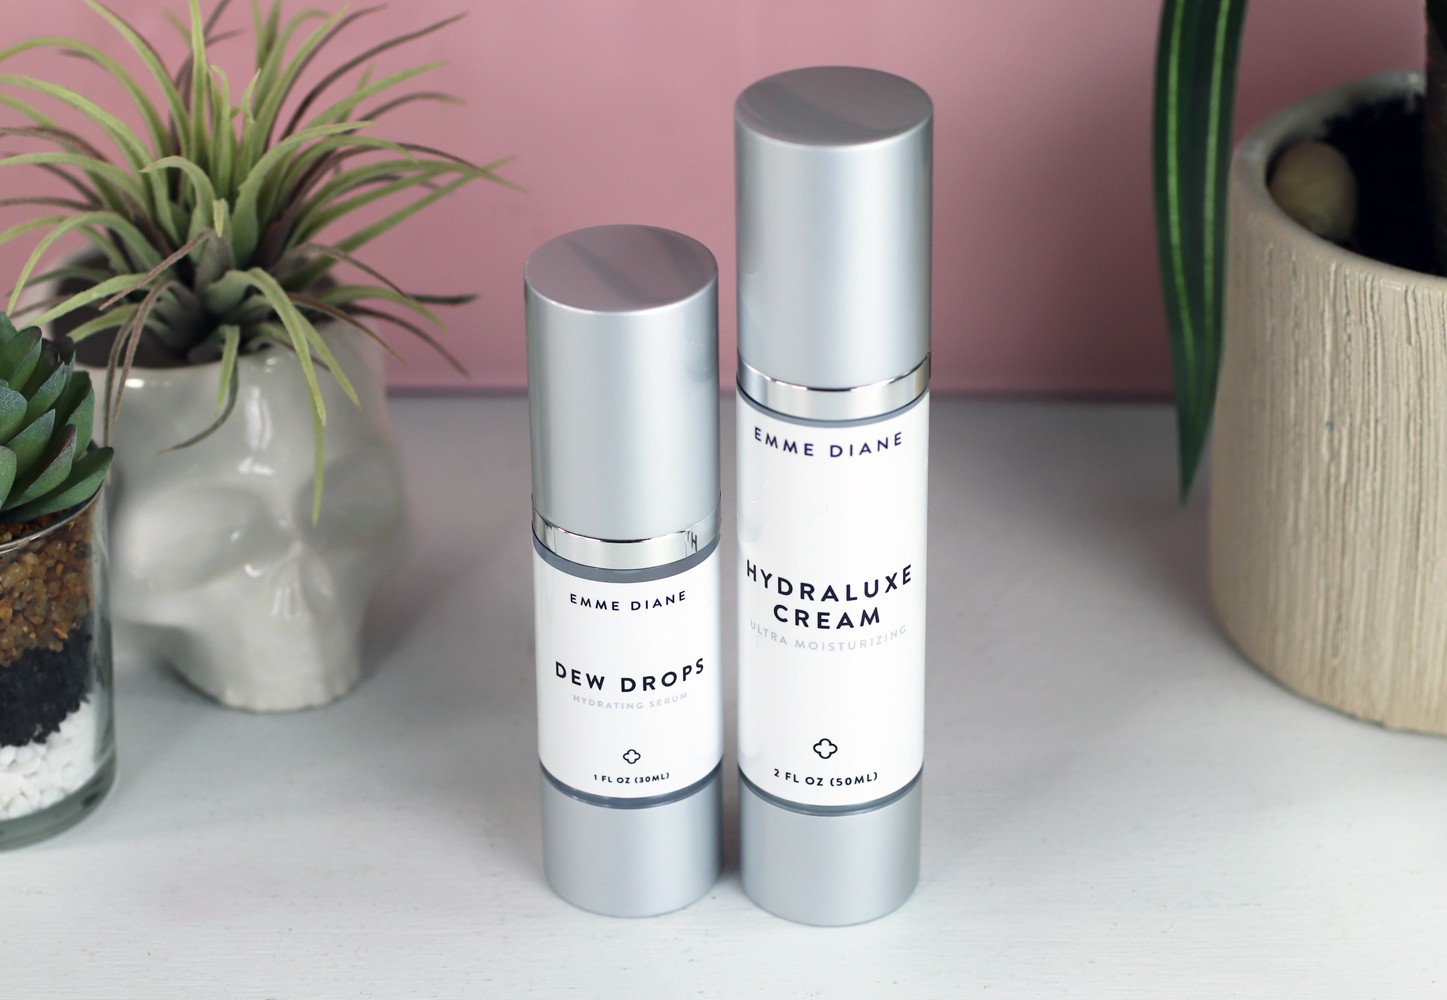 Emme Diane Dew Drops and Hydraluxe Cream - perfect for dry skin with acne - Products You Need For Dry Acne Prone Skin by popular LA cruelty free beauty blogger My Beauty Bunny